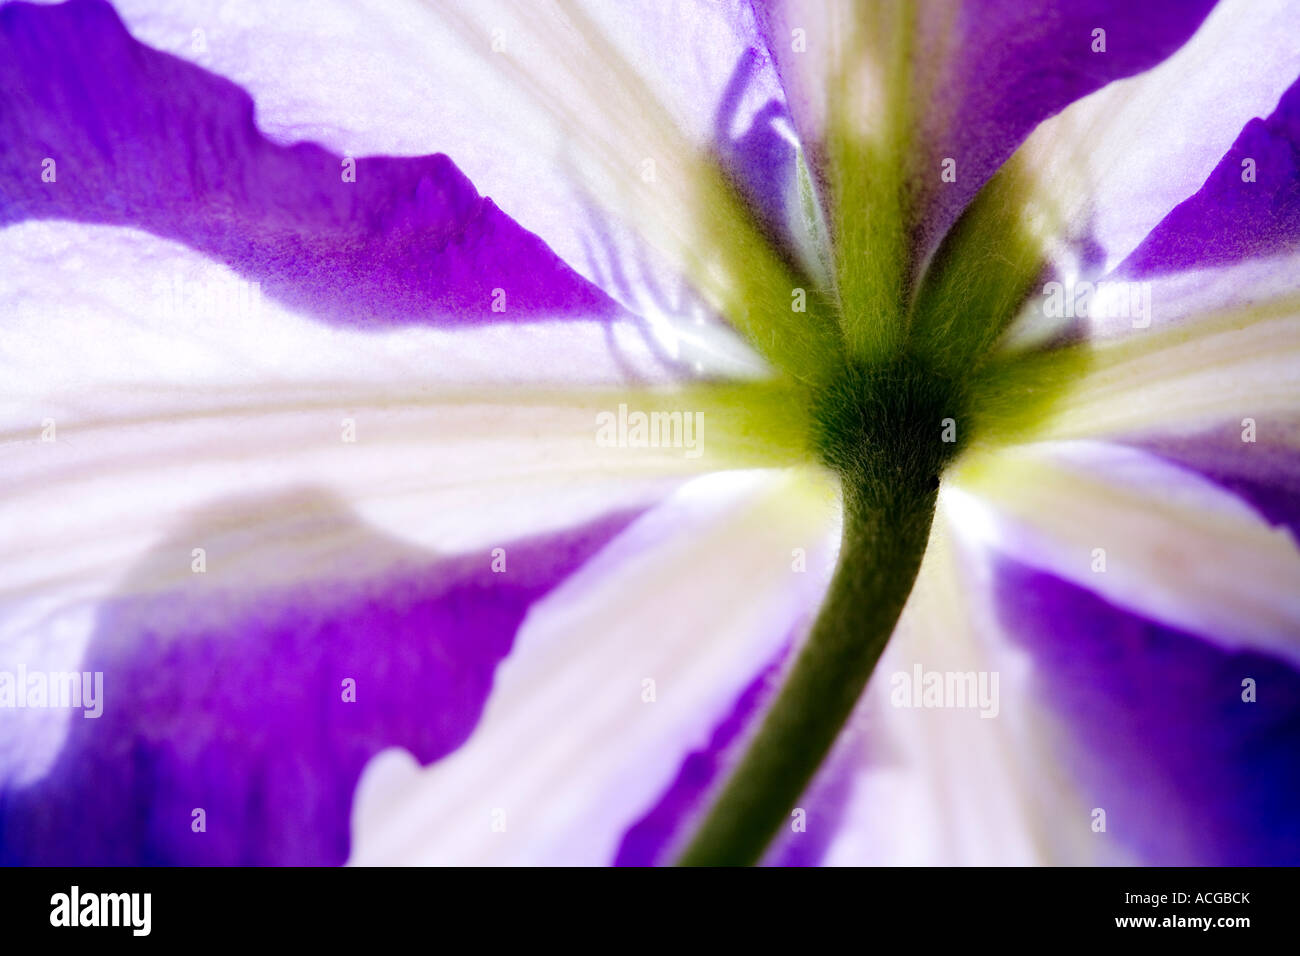 Abstract image of the underside of a purple and white clematis suitable for greetings cards, calender, posters, fine art prints Stock Photo